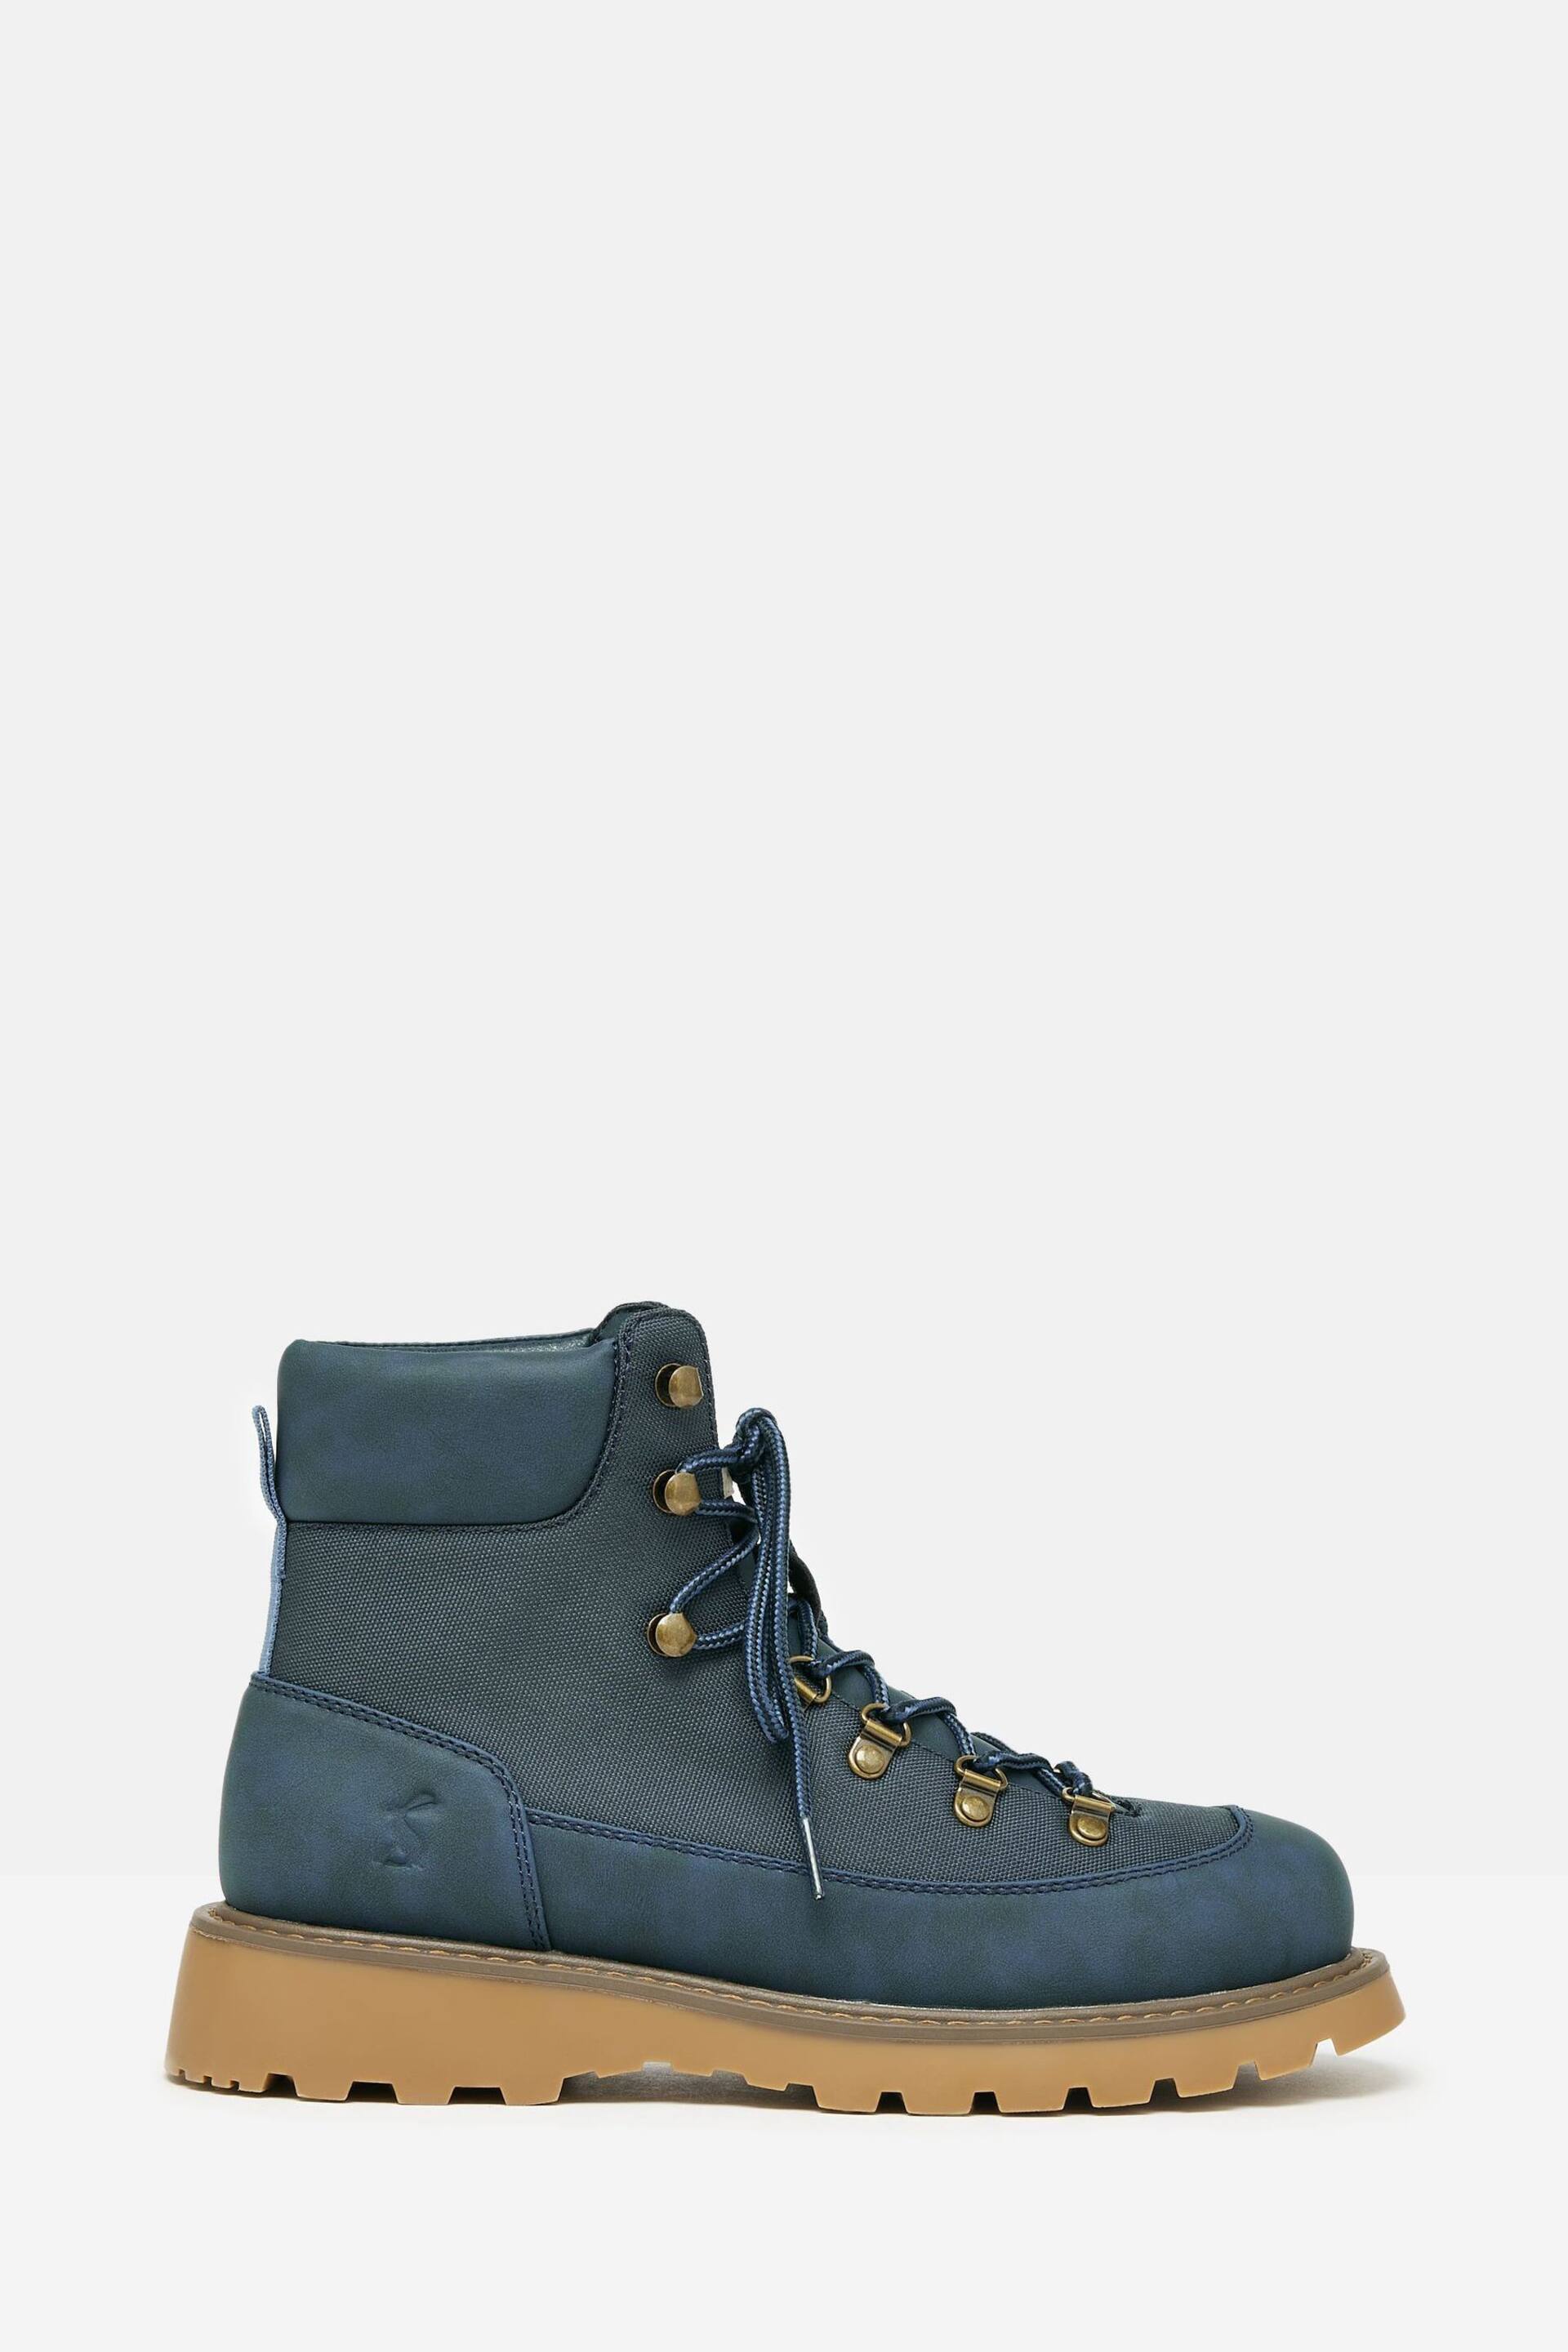 Joules Kendall Navy Lace-Up Boots - Image 1 of 8